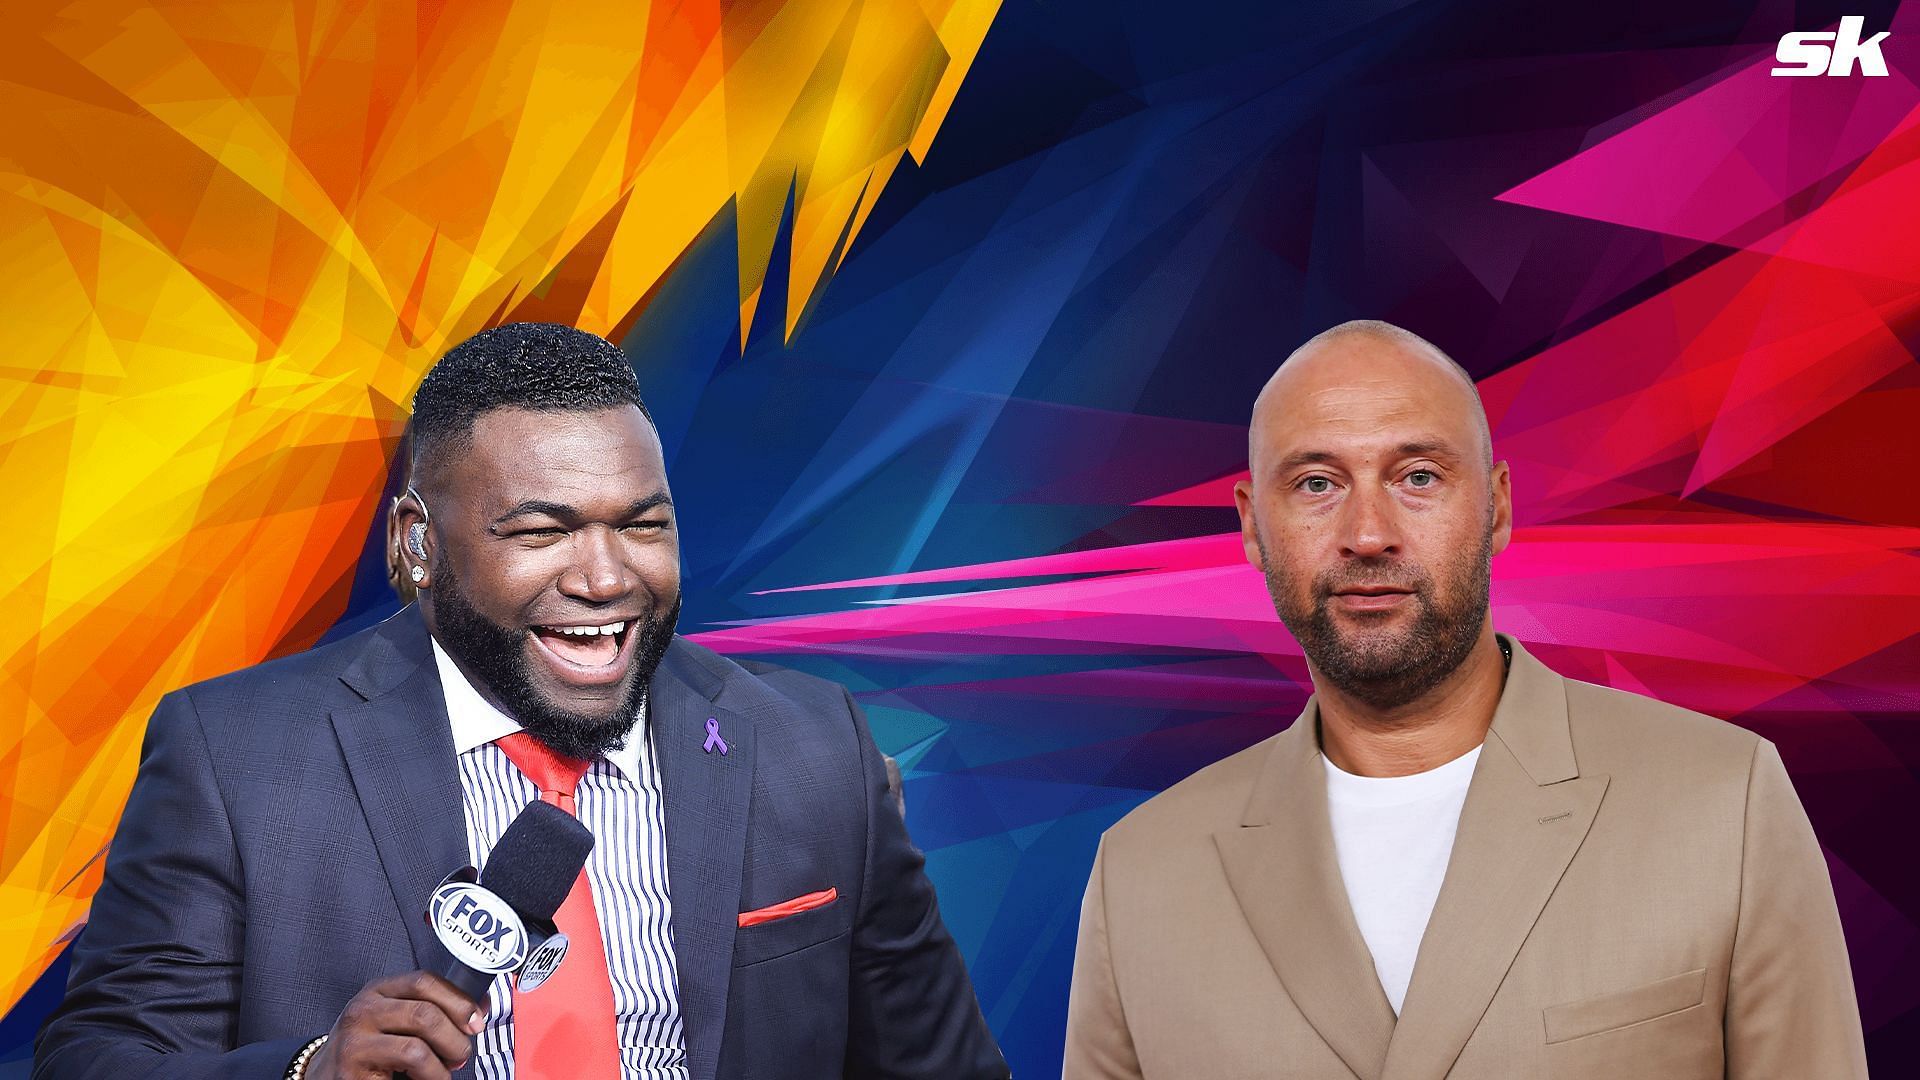 David Ortiz gets candid about Derek Jeter in a podcast